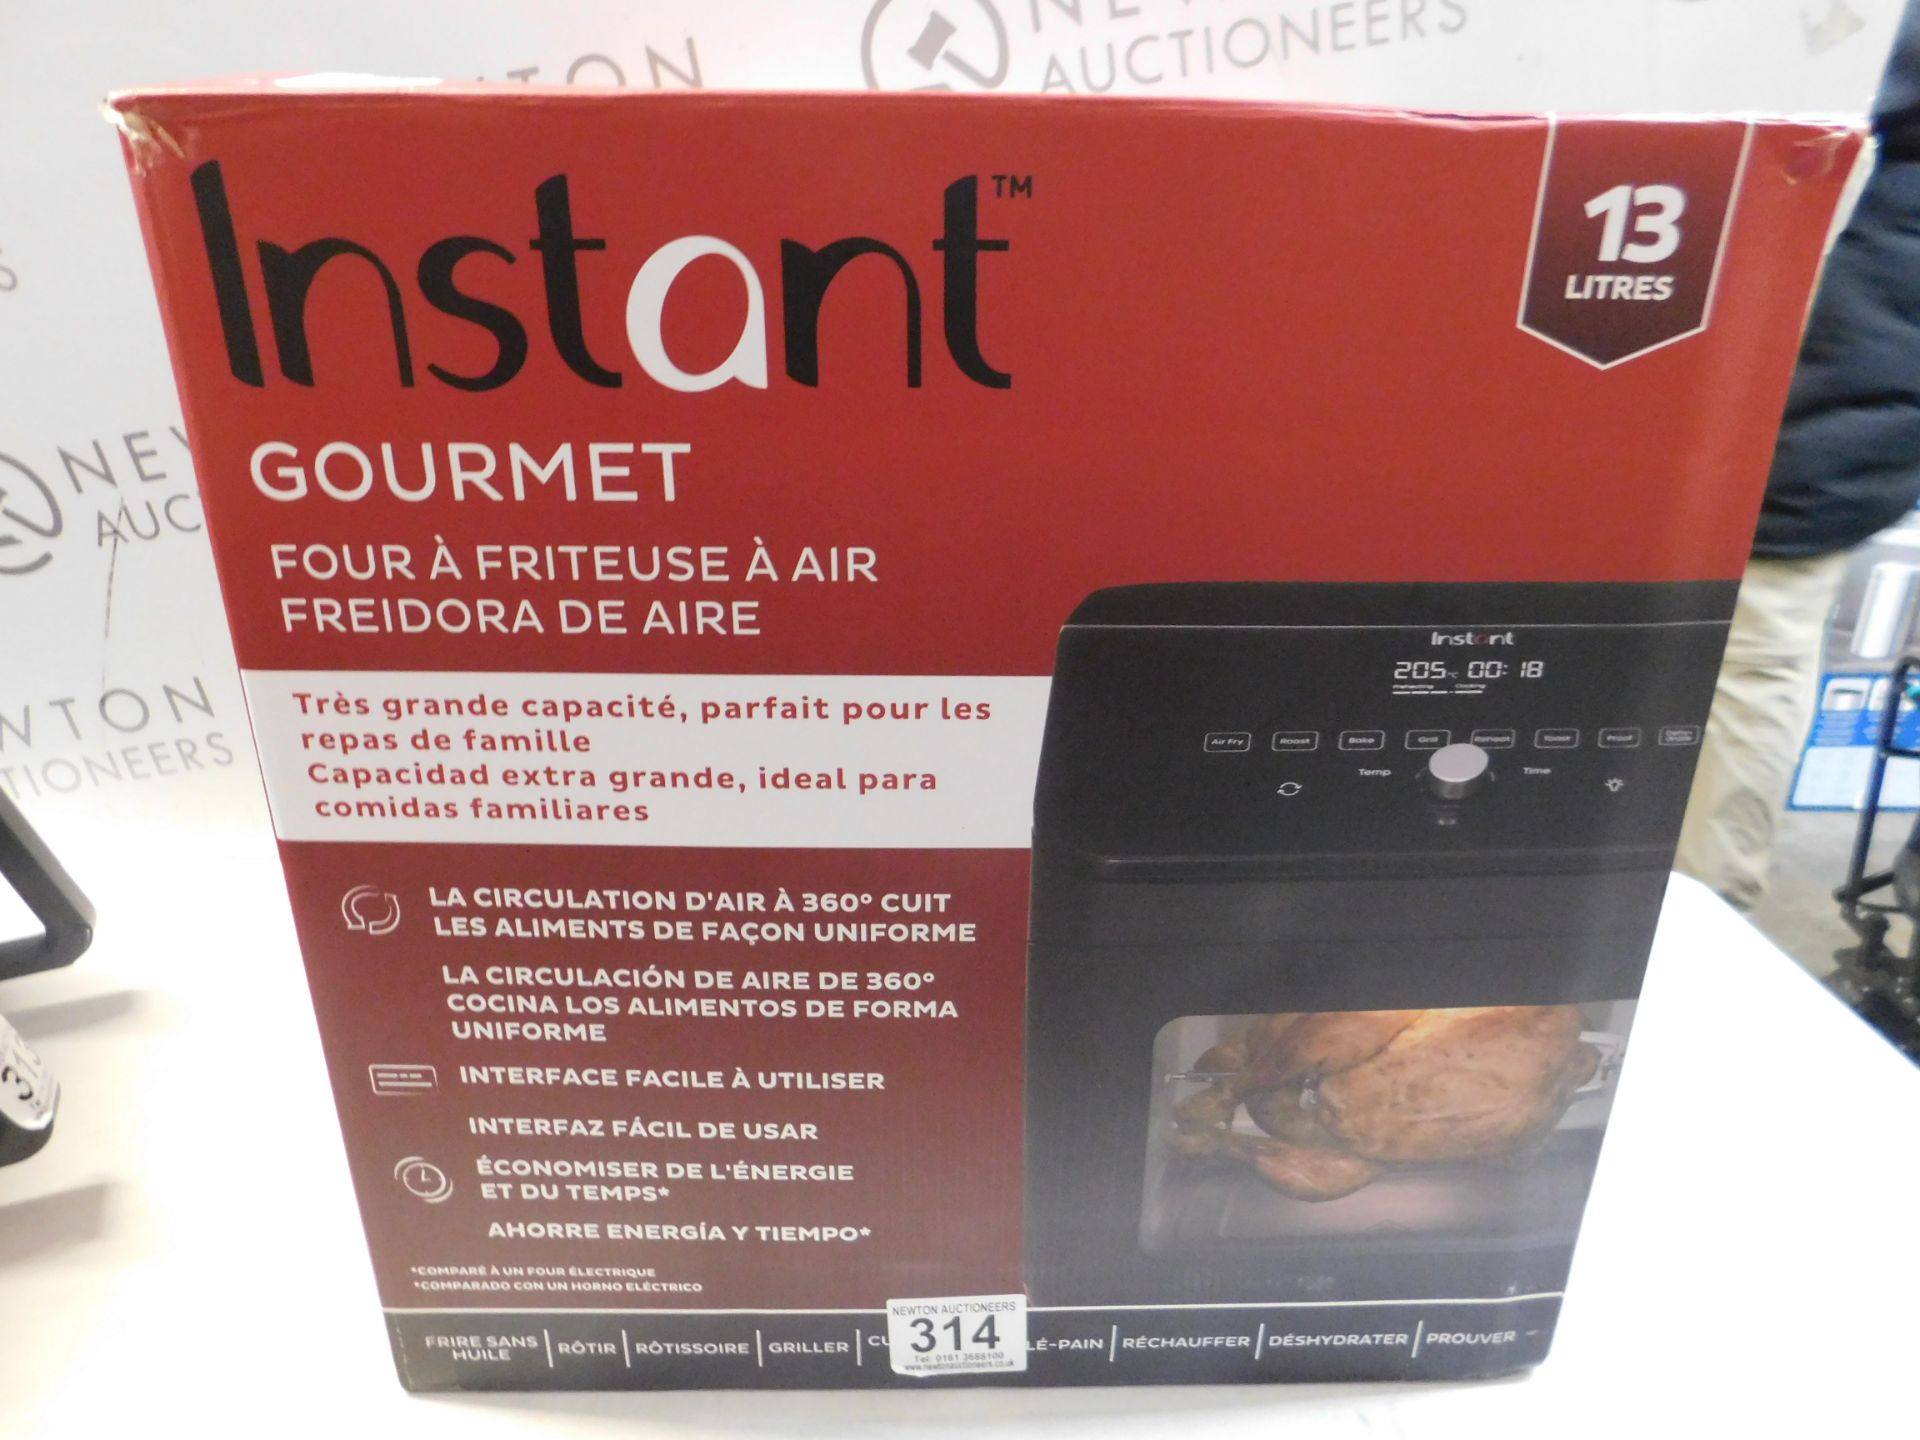 1 BOXED INSTANT VORTEX CLEARCOOK AIR FRYER OVEN, 13L RRP Â£119